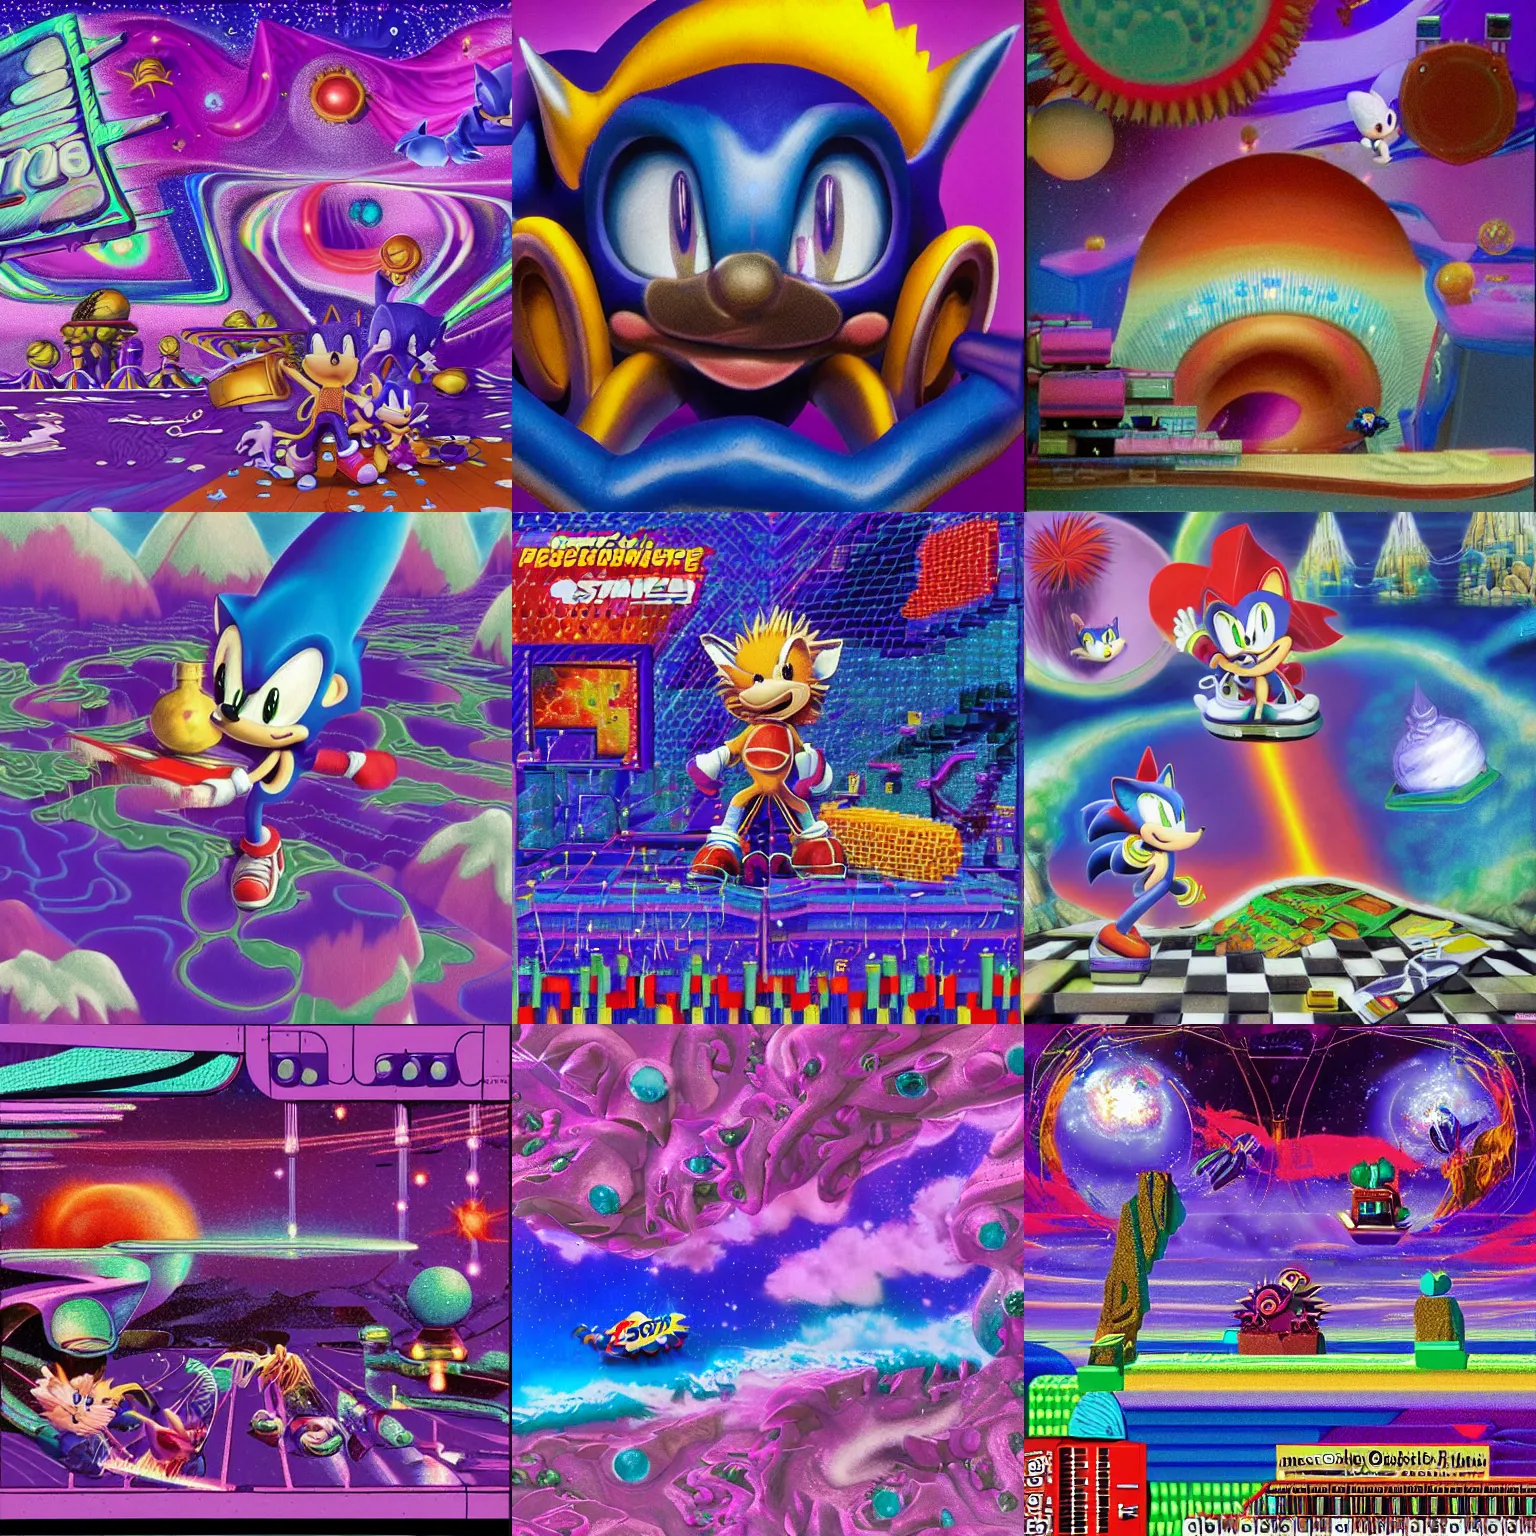 Prompt: dreaming of sonic hedgehog portrait deconstructivist claymation scifi matte painting landscape of a surreal stars, retro moulded professional soft pastels high quality airbrush art album cover of a liquid dissolving airbrush art lsd sonic the hedgehog swimming through cyberspace purple teal checkerboard background 1 9 8 0 s 1 9 8 2 sega genesis video game album cover